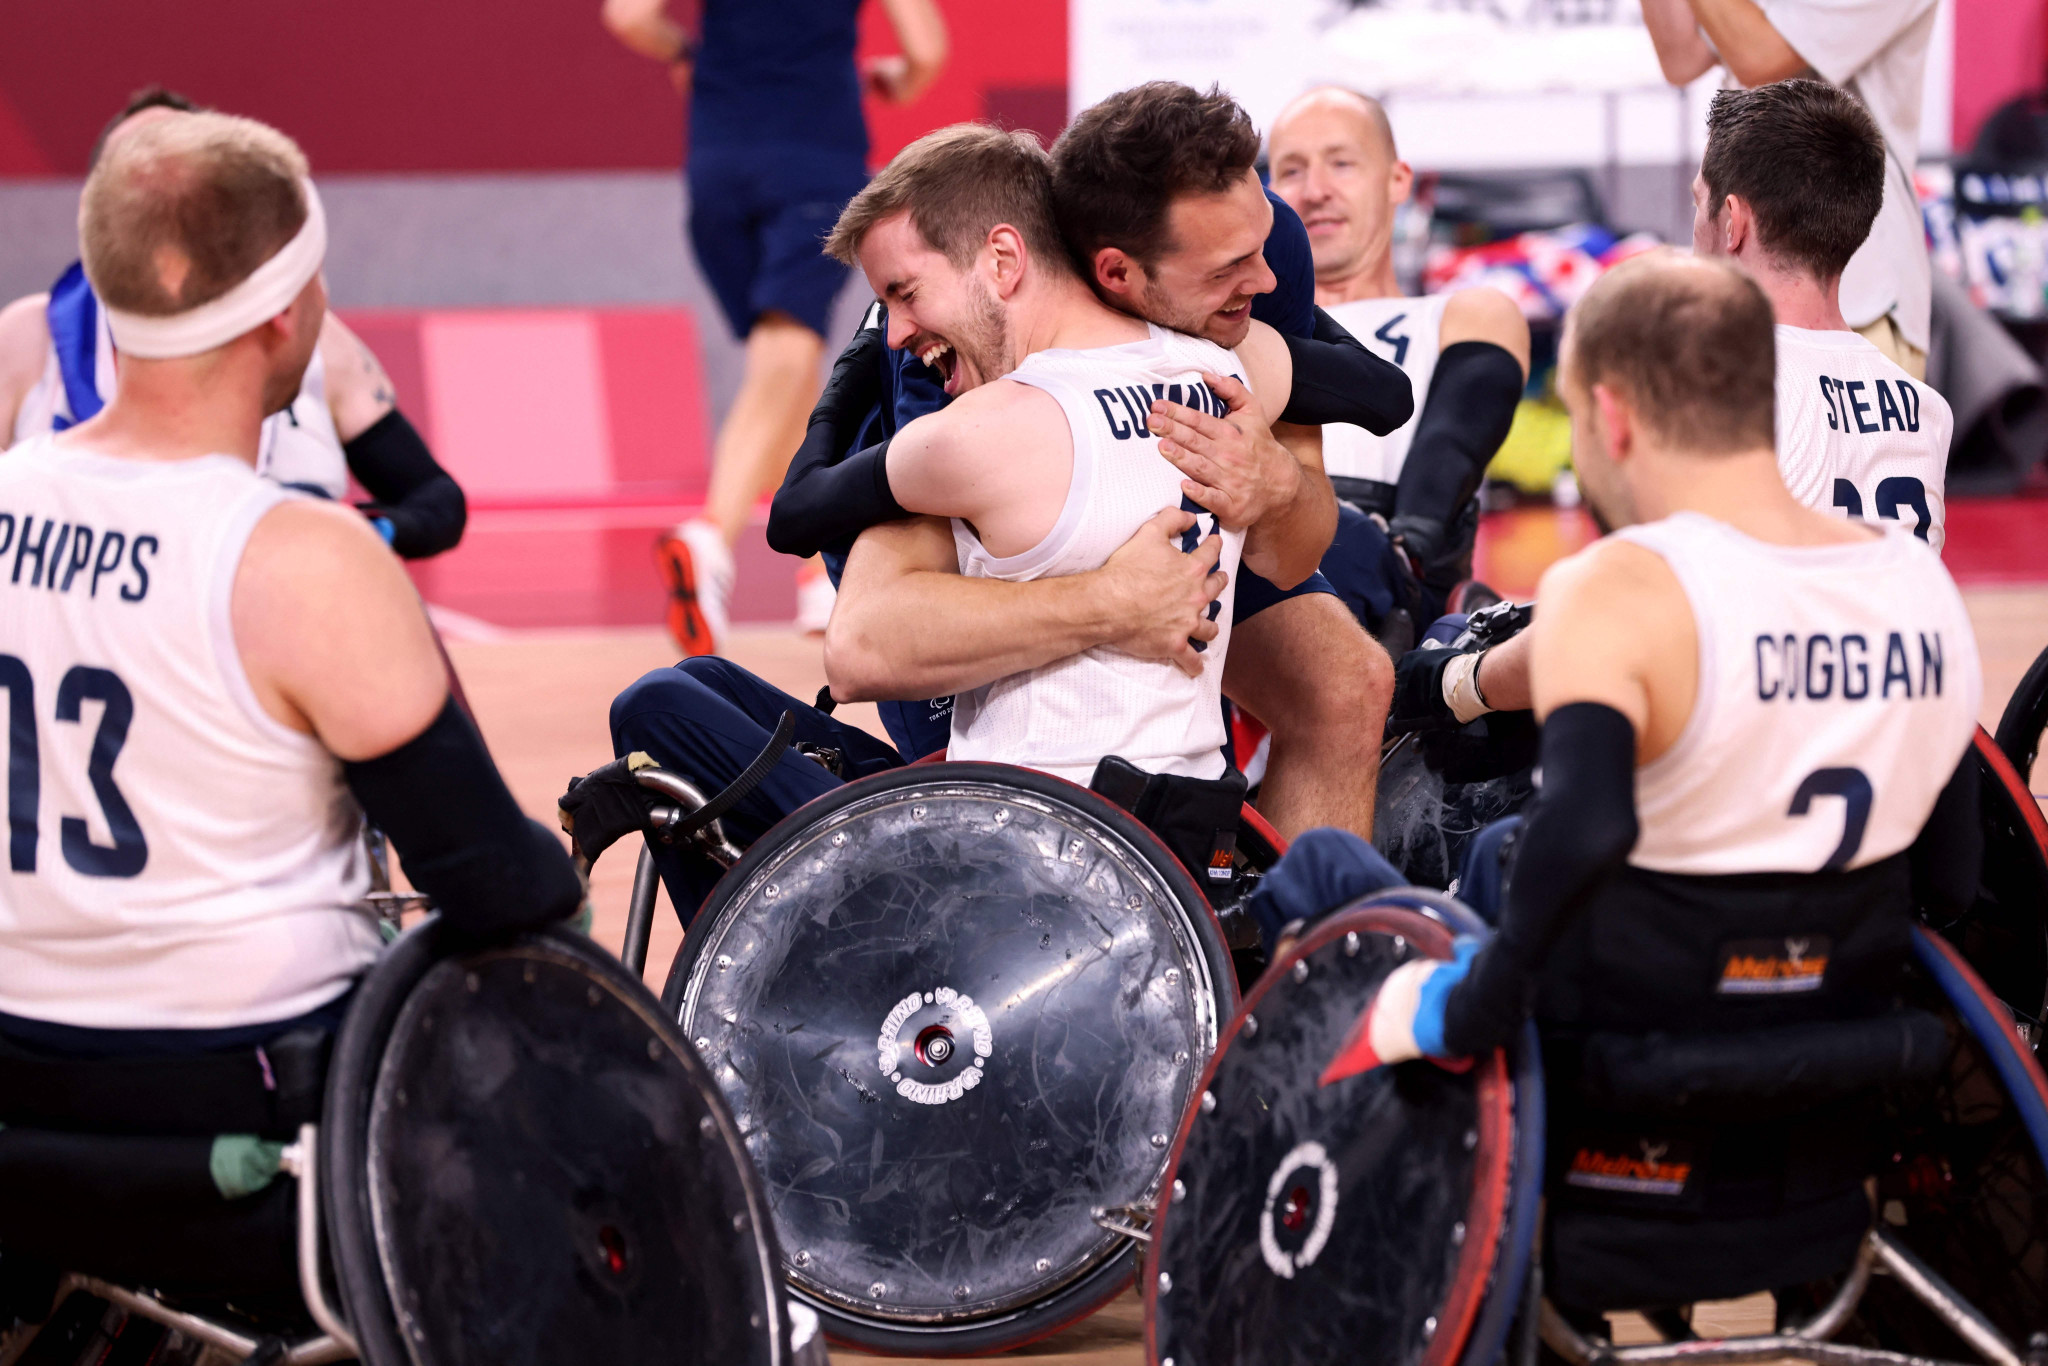 Britain are the reigning Paralympic champions in wheelchair rugby ©Getty Images